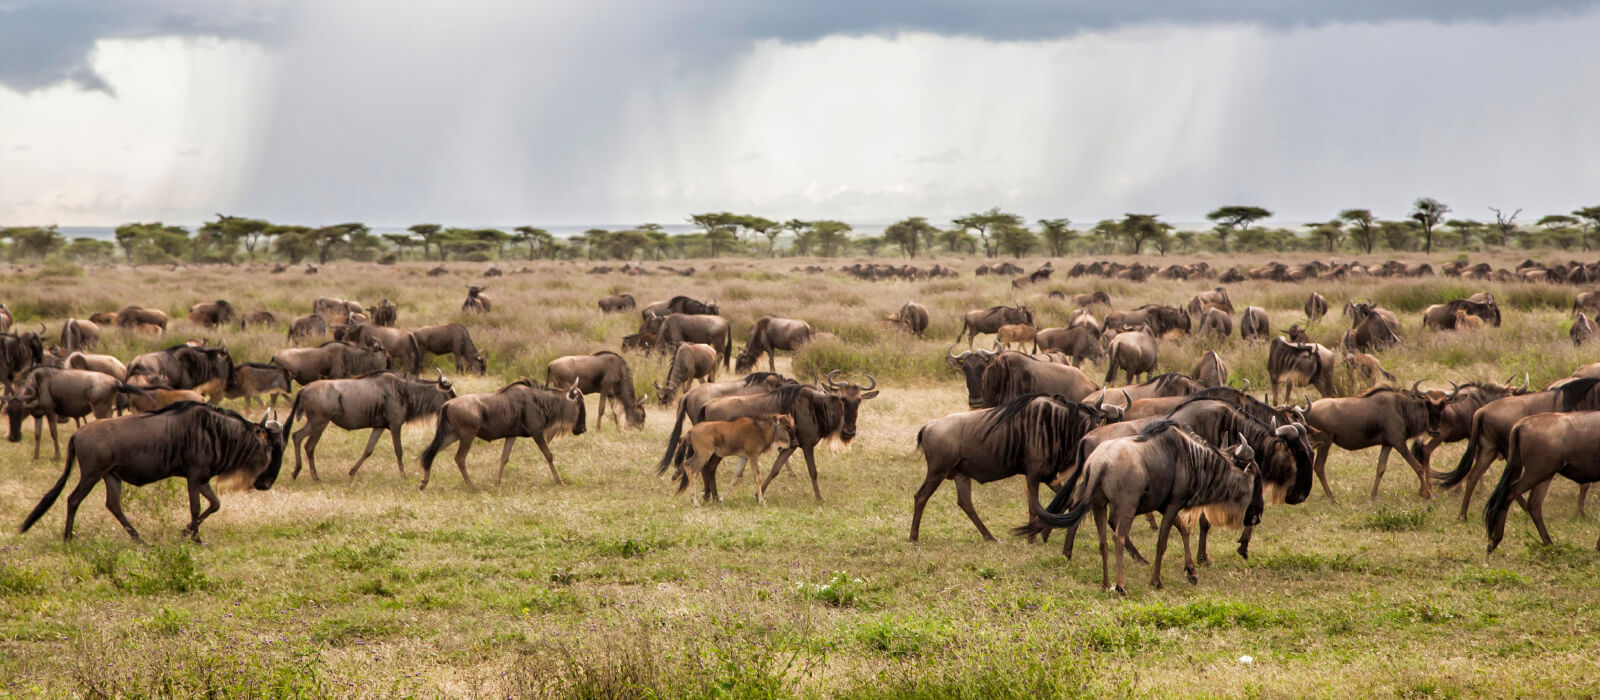 Wildebeest in Tanzania photographed on a luxury safari package with Premier Africa.